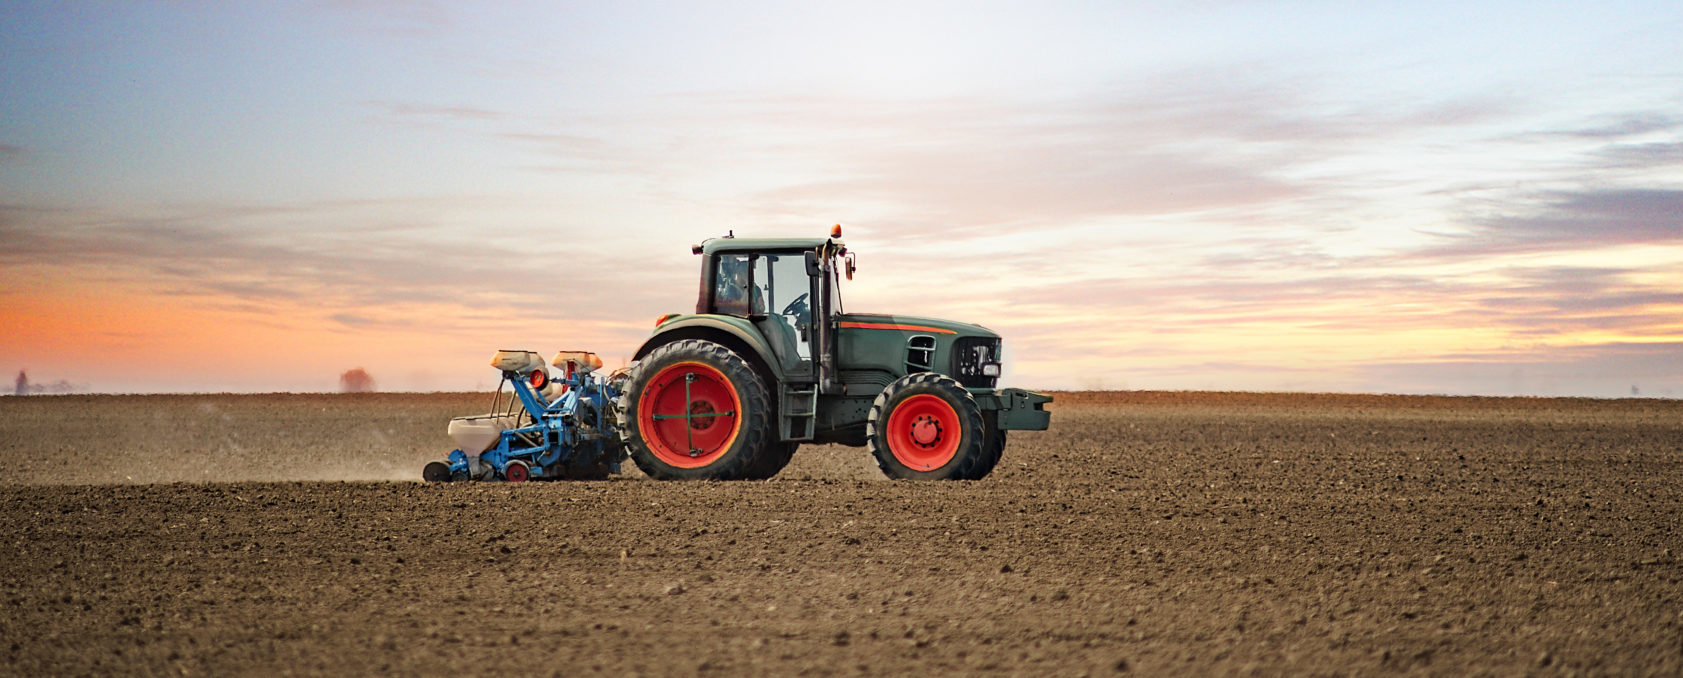 Panoramic,Landscape,View,Of,The,Tractor,On,The,Field,Sowing.